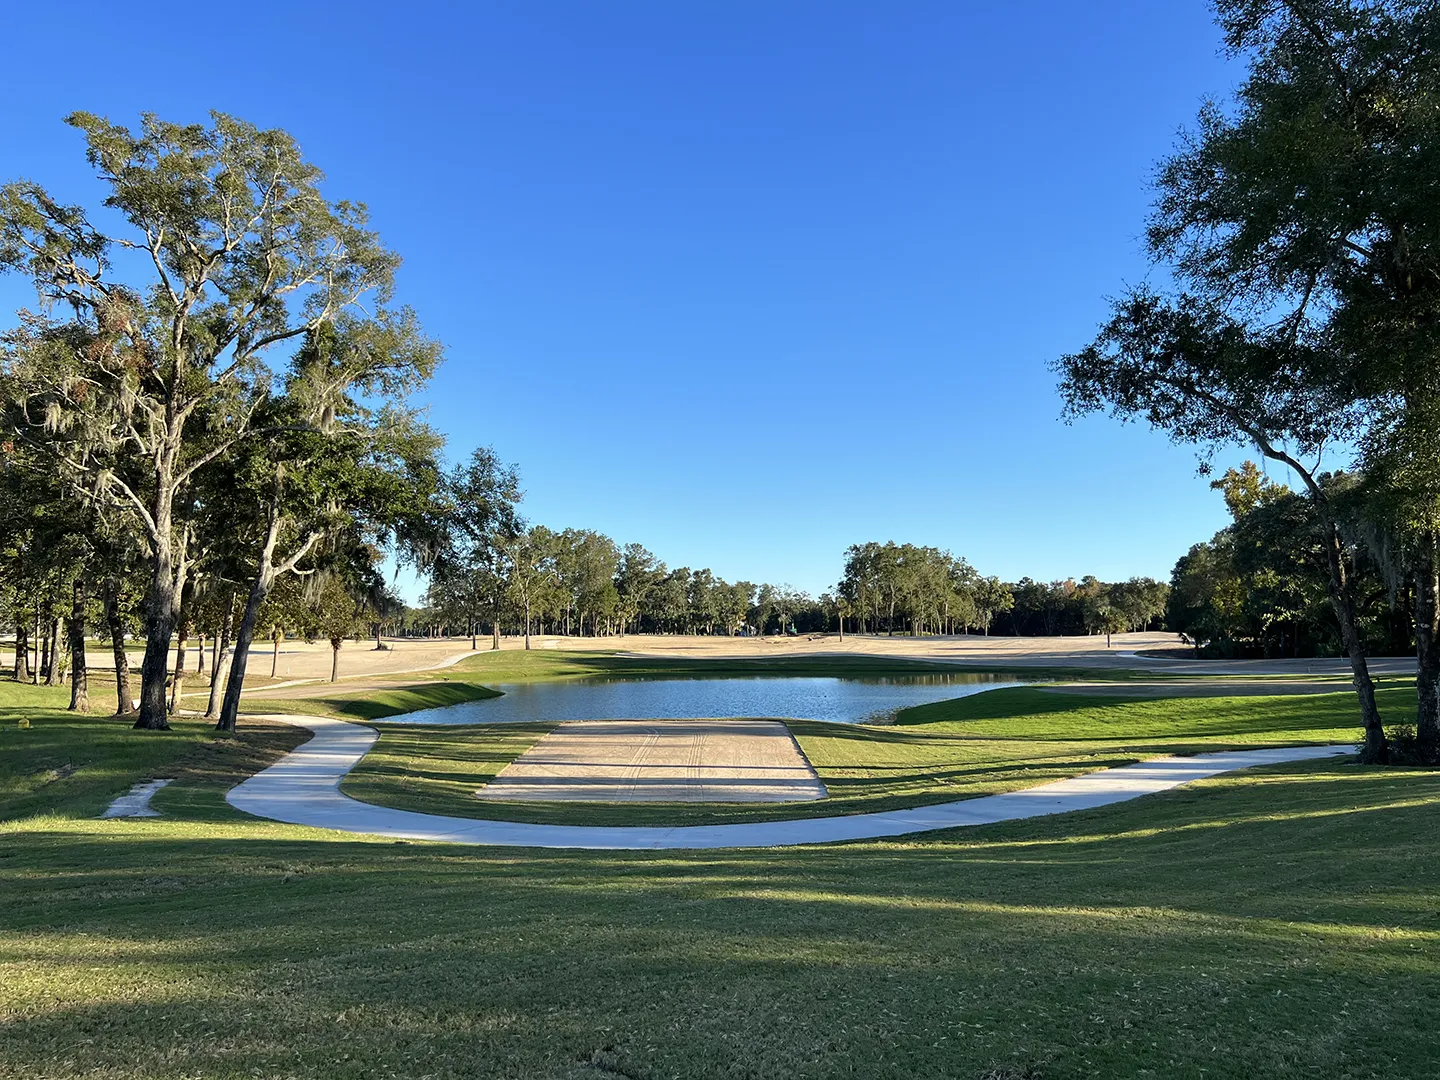 The Wakulla Sands Golf Club solves concerns for the new wastewater treatment facility regarding effluent, while providing a community facility that can be enjoyed by the public.